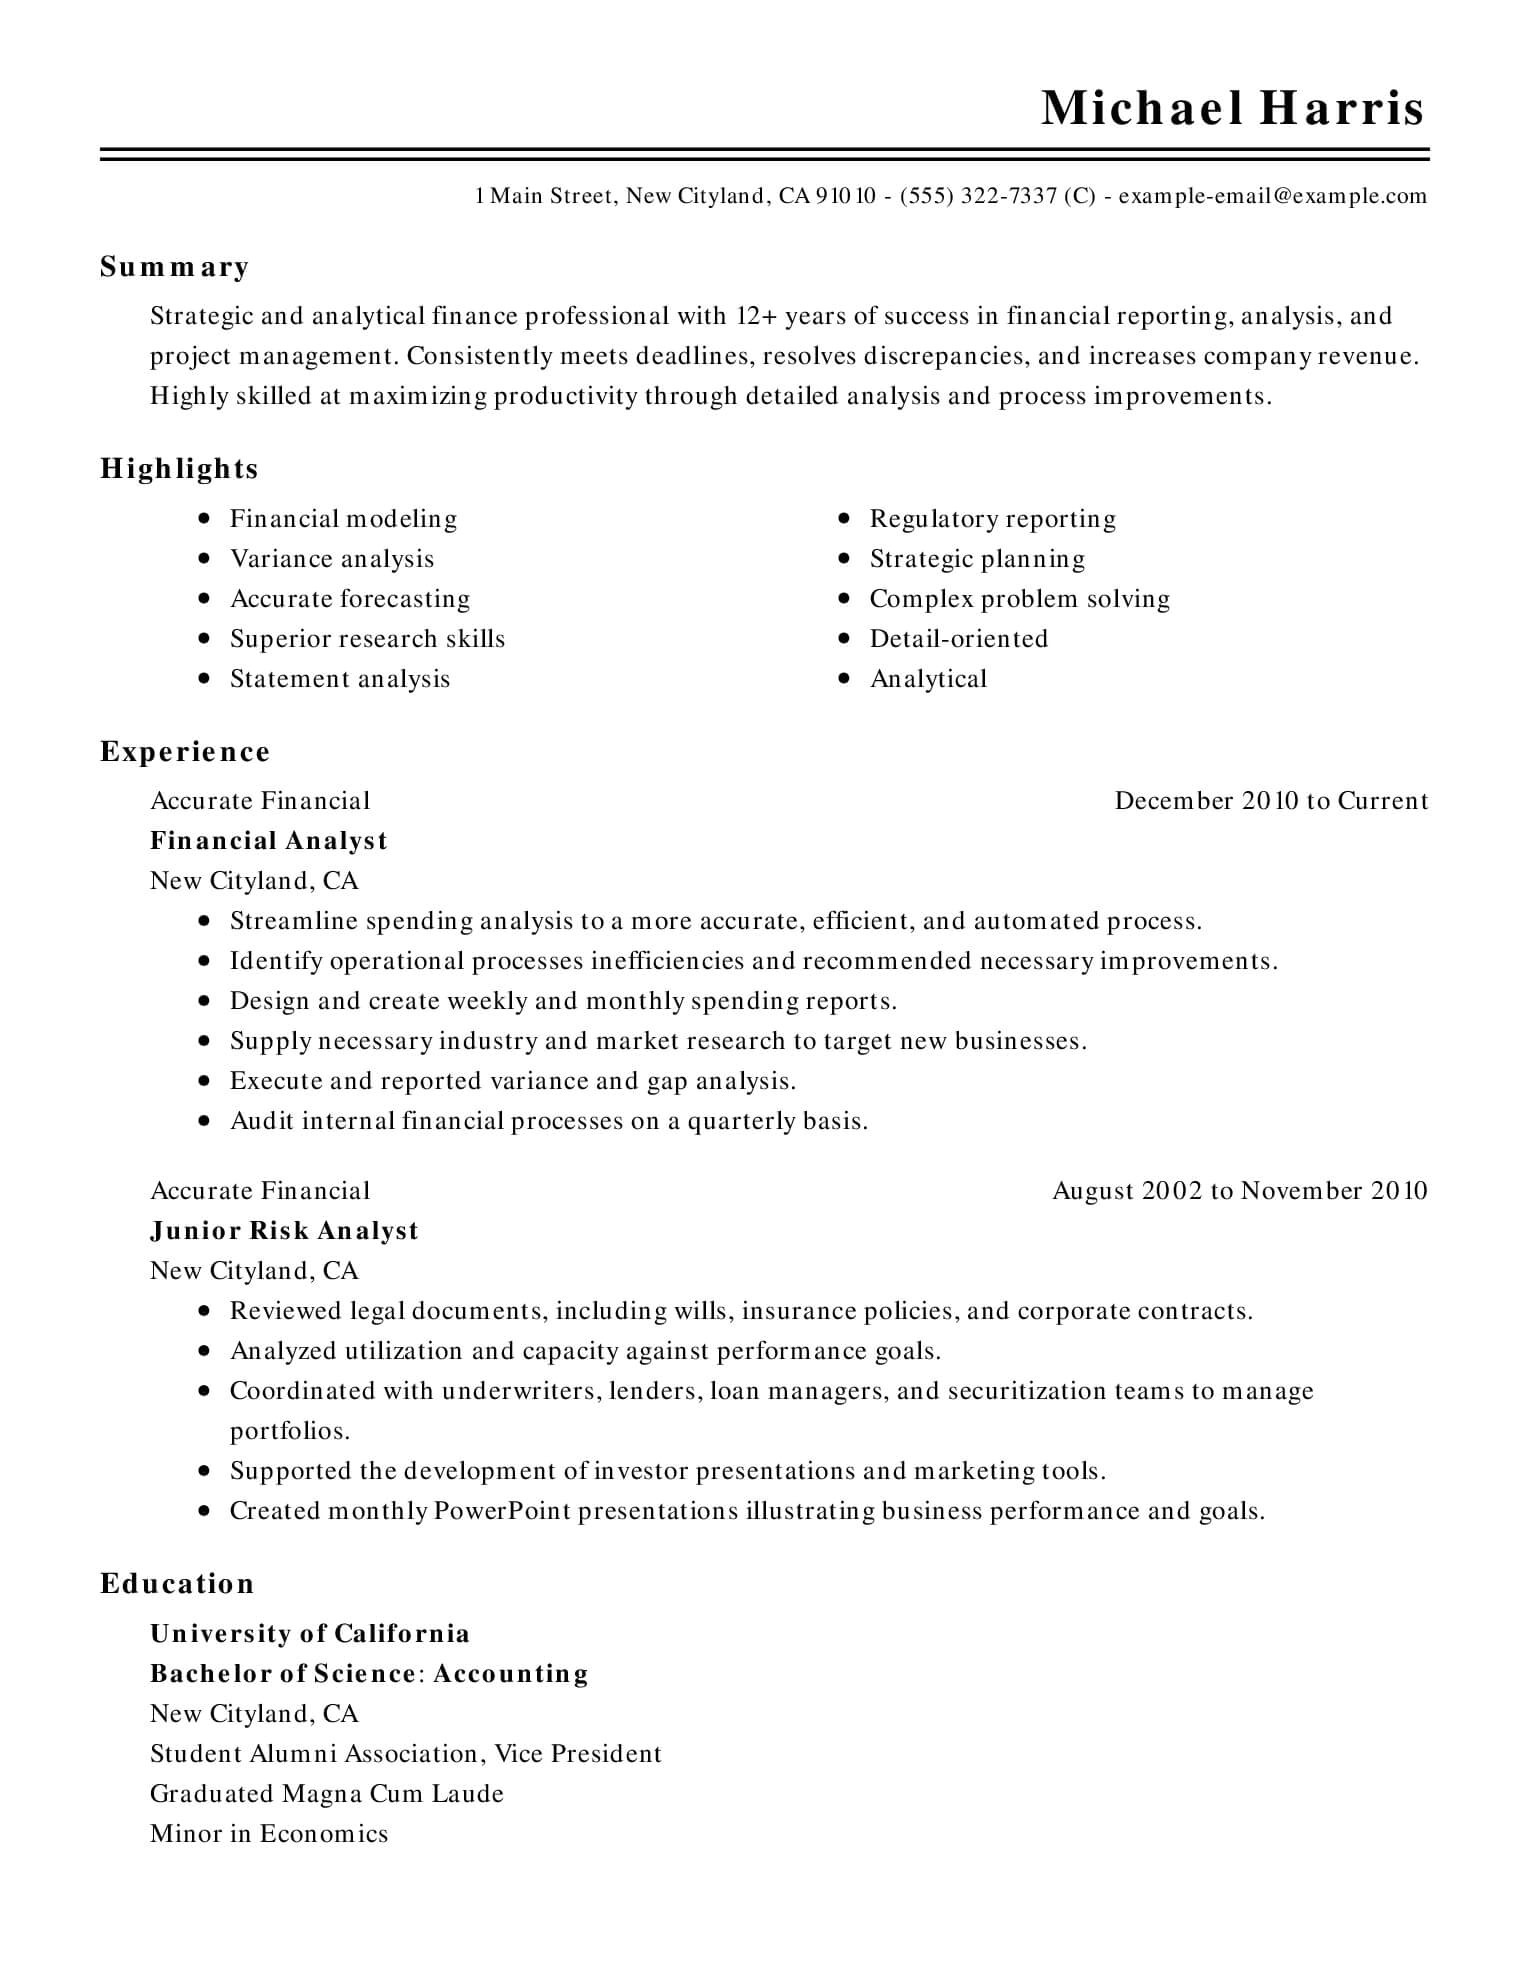 Resume format Windows Word 15 Of the Best Resume Templates for Microsoft Word Office